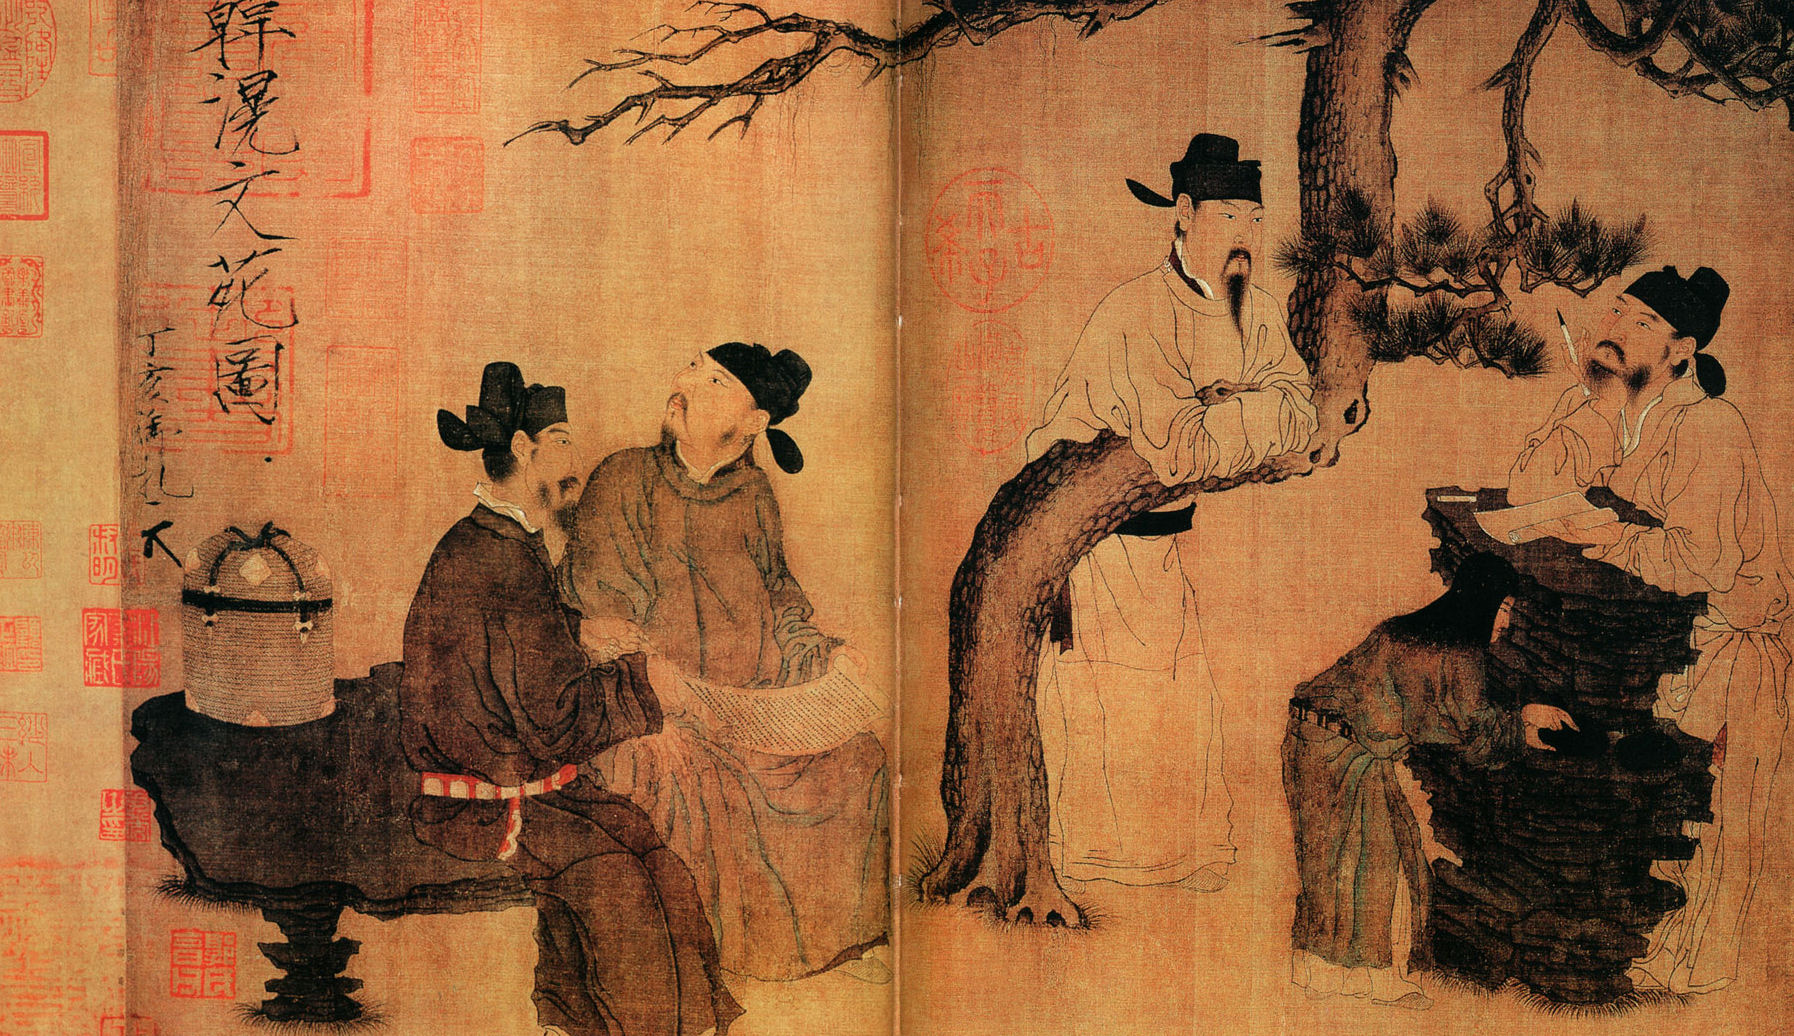  “Gathering of the literati” (Wenyuan tu), believed to have been a work by Zhou Wengui of the Five Dynasties period, 907-960. 